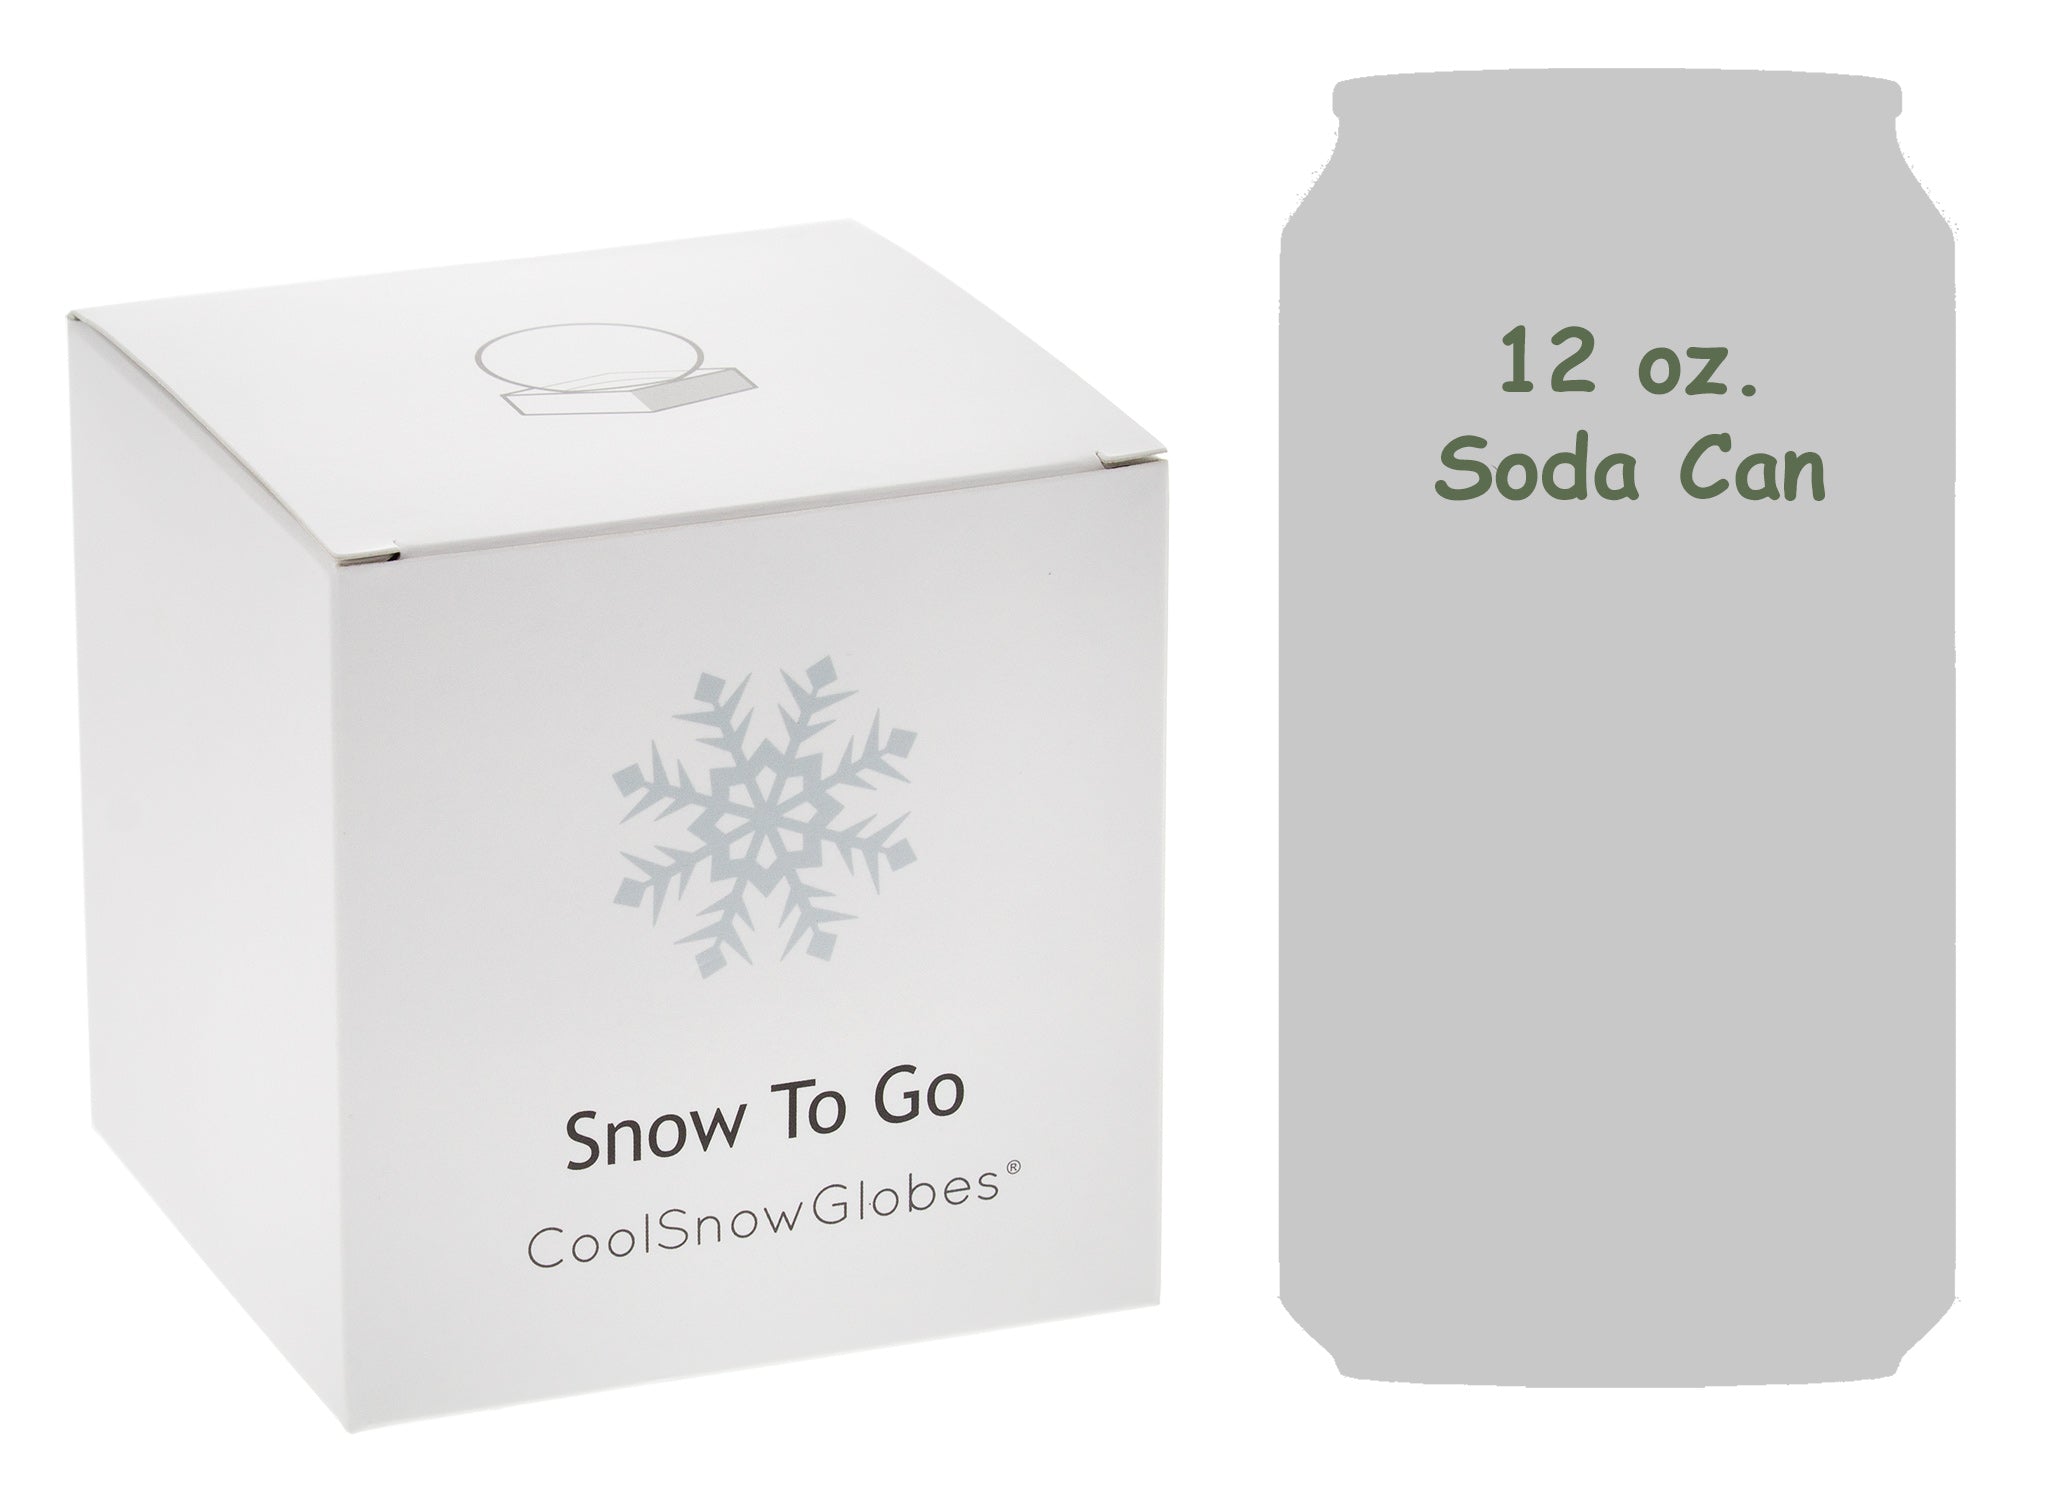 Snow to Go 65mm Small Snow Globe, size compared to 12 ounce soda can.